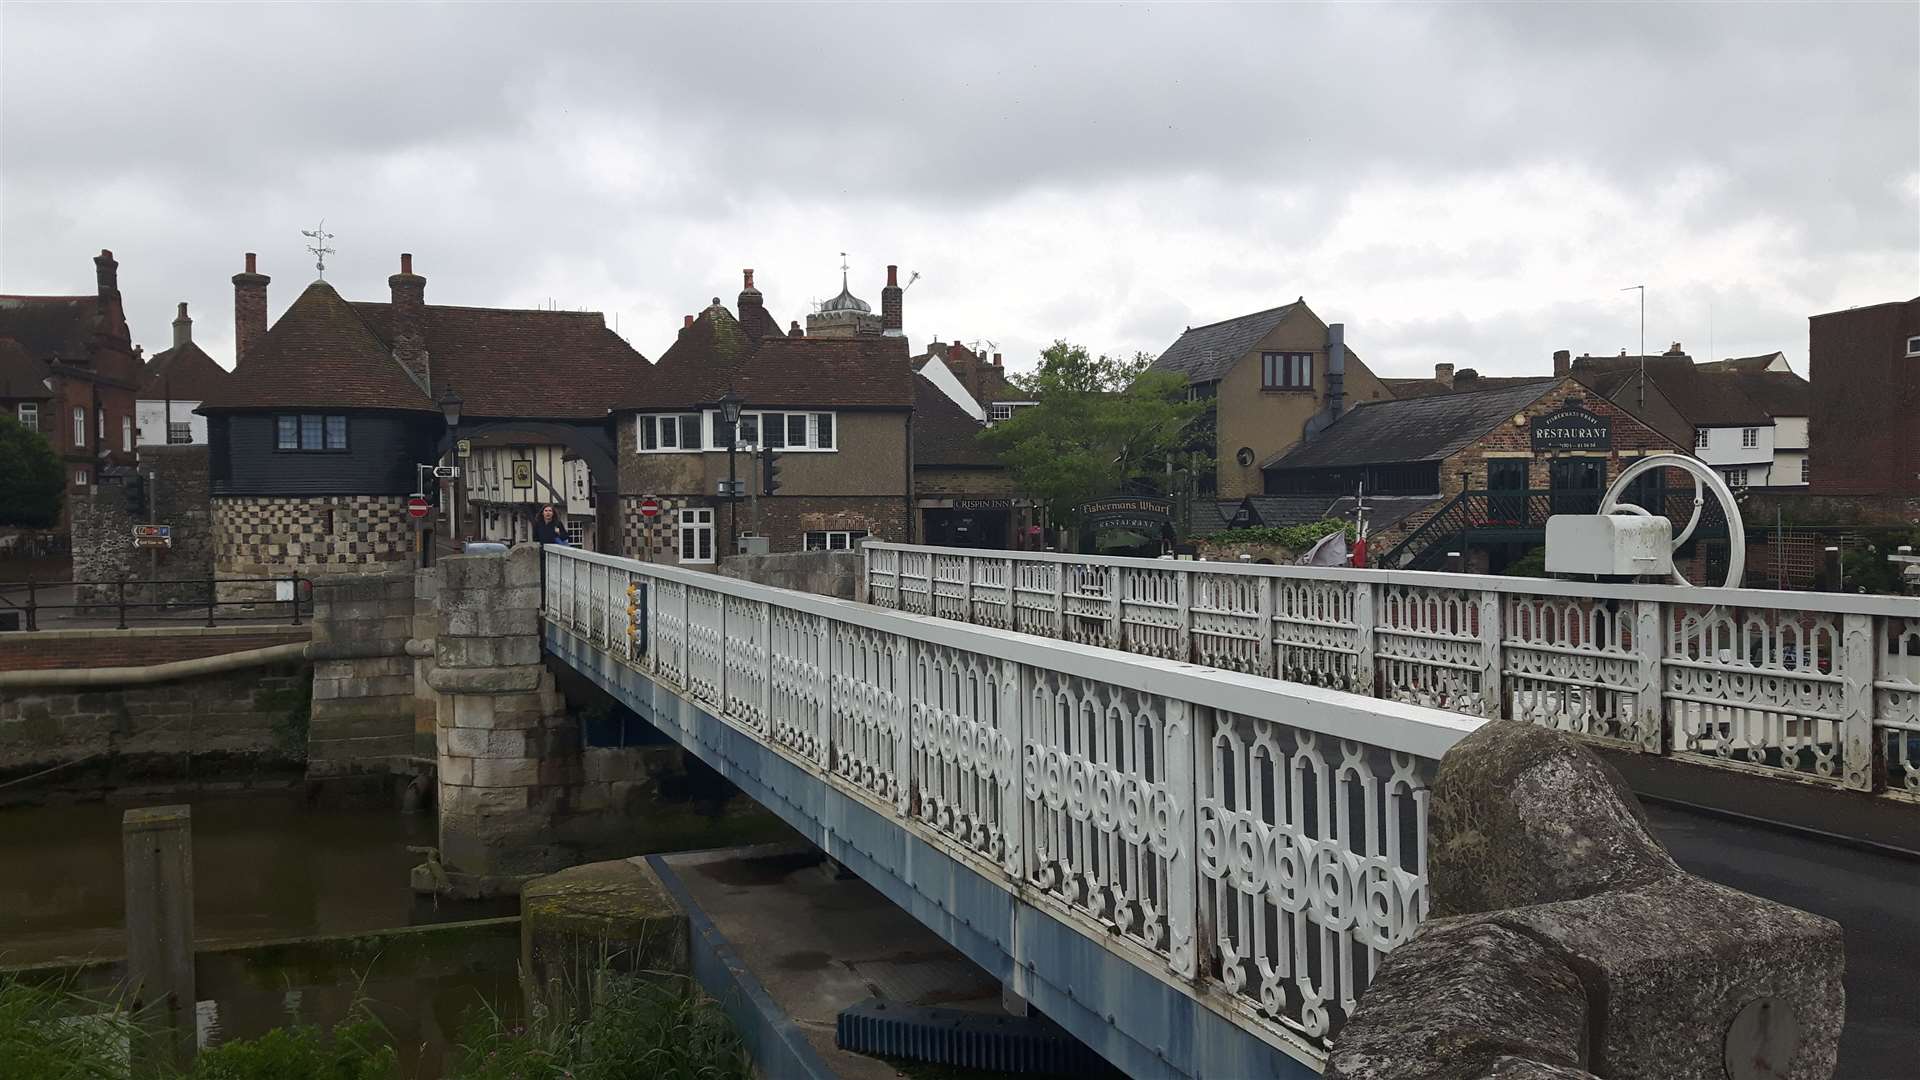 Essential maintenance to Sandwich Toll Bridge has been postponed until the end of March